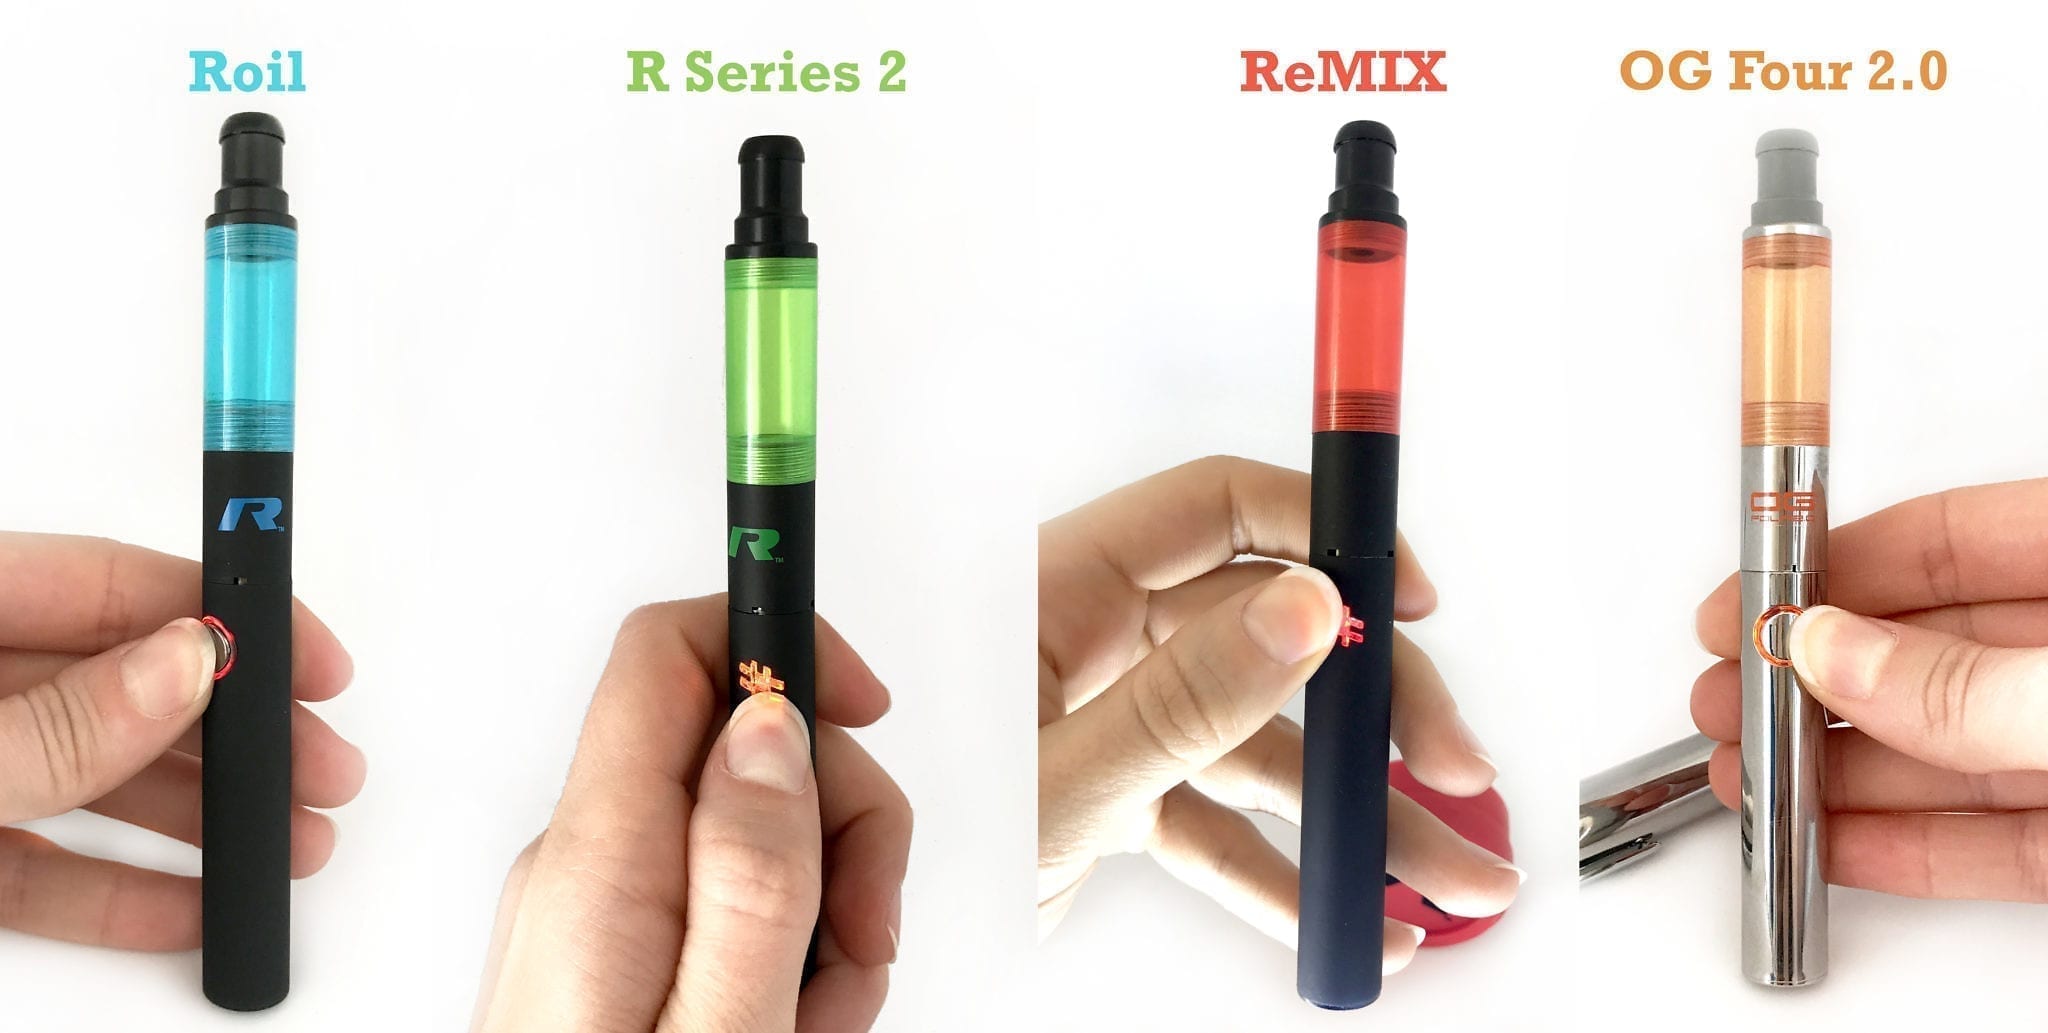 This Thing Rips Vape Pens; Roil, R Series 2, ReMIX, OG Four 2.0